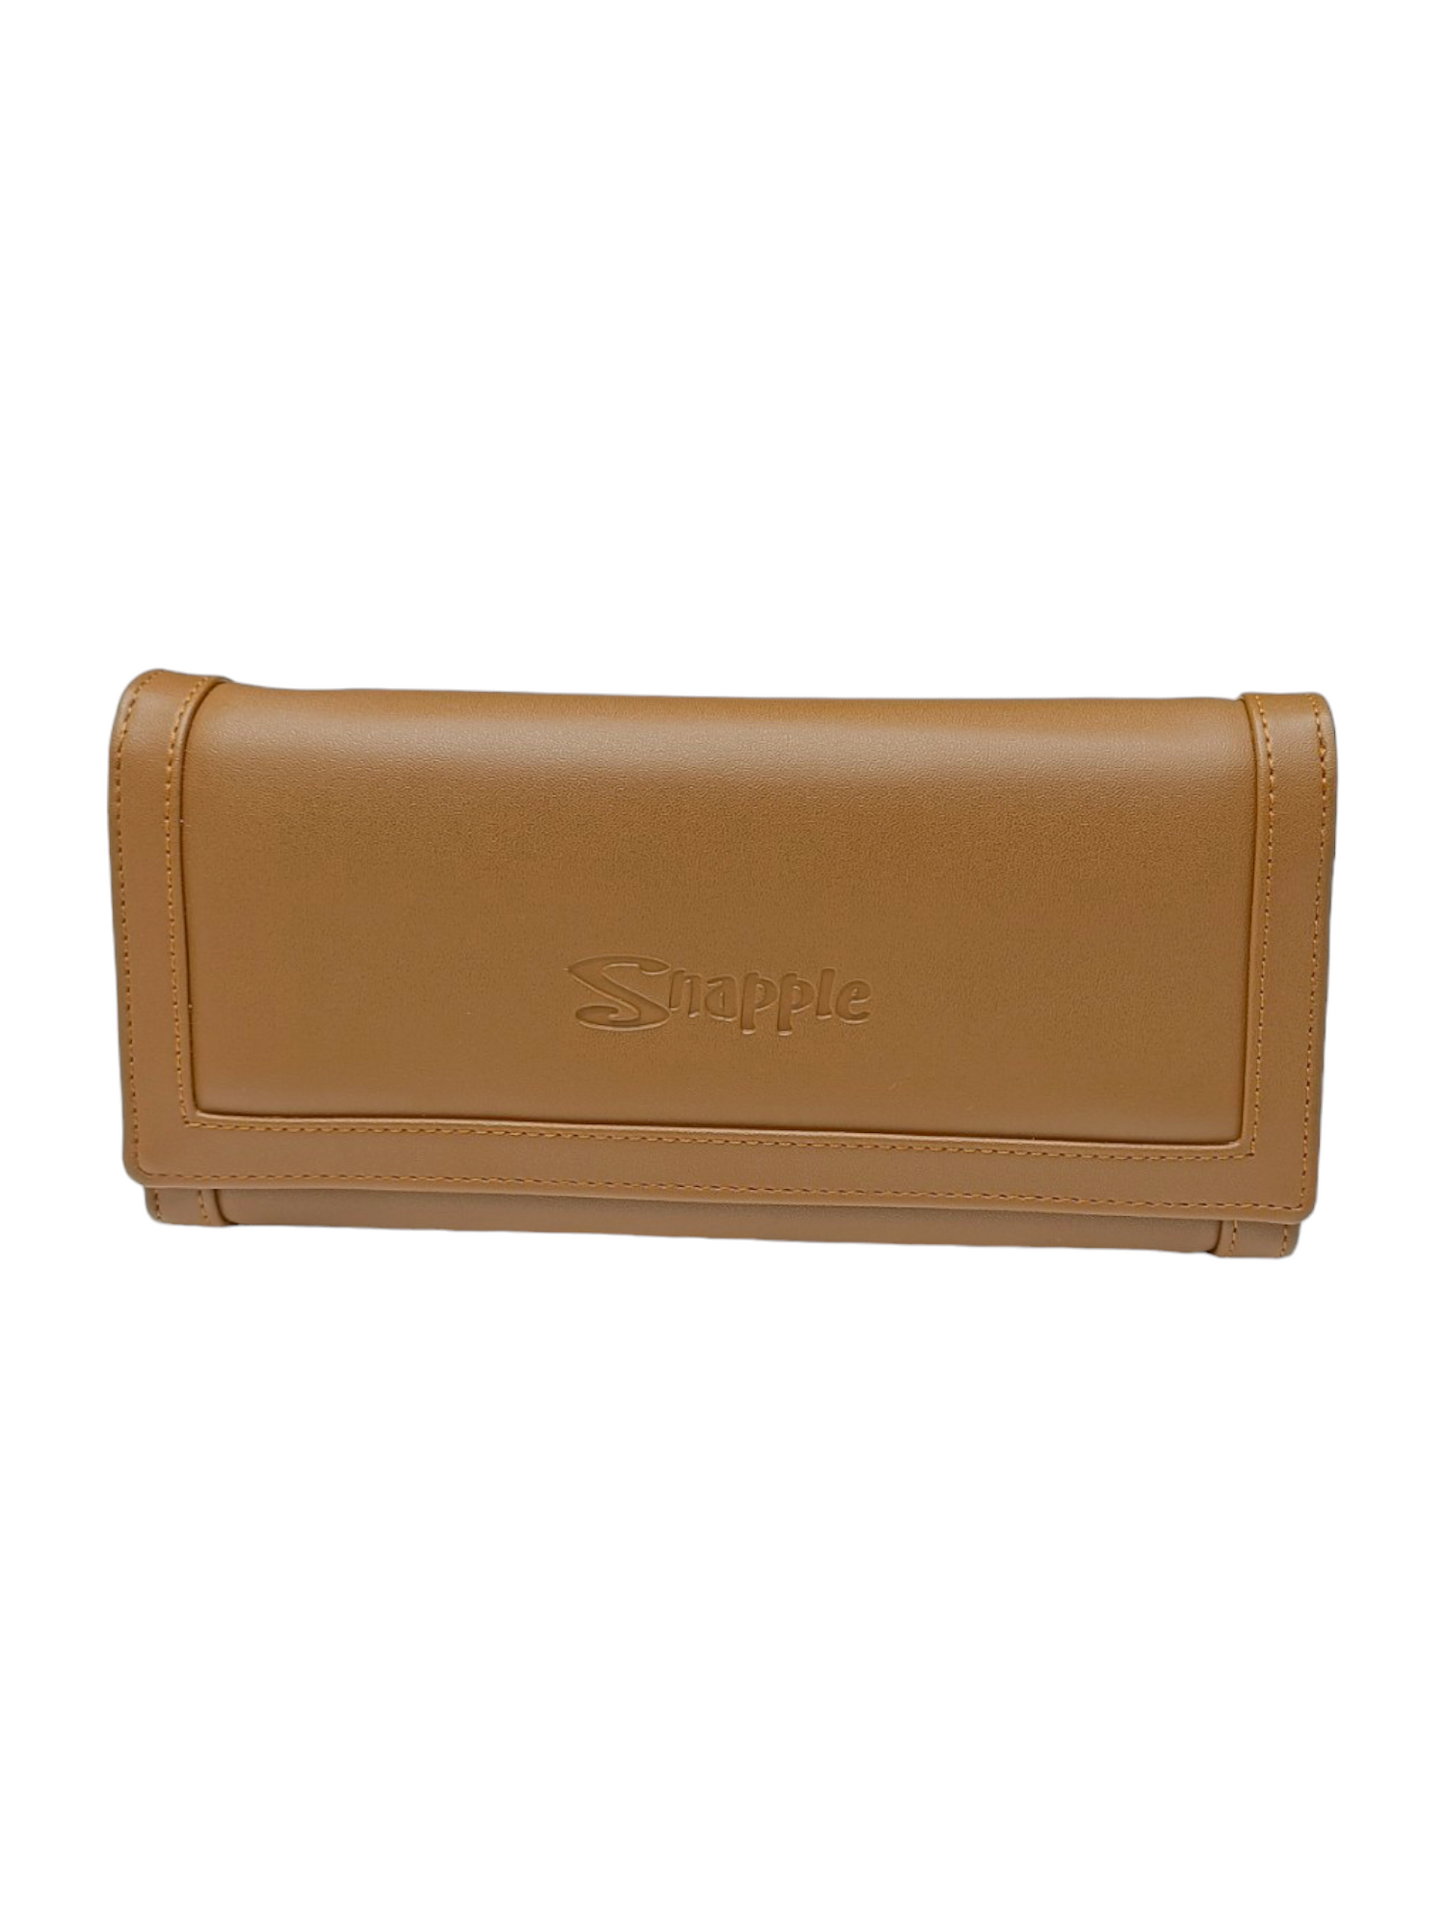 Abc's snapple super spacious with maximum pocket clutch, wallet